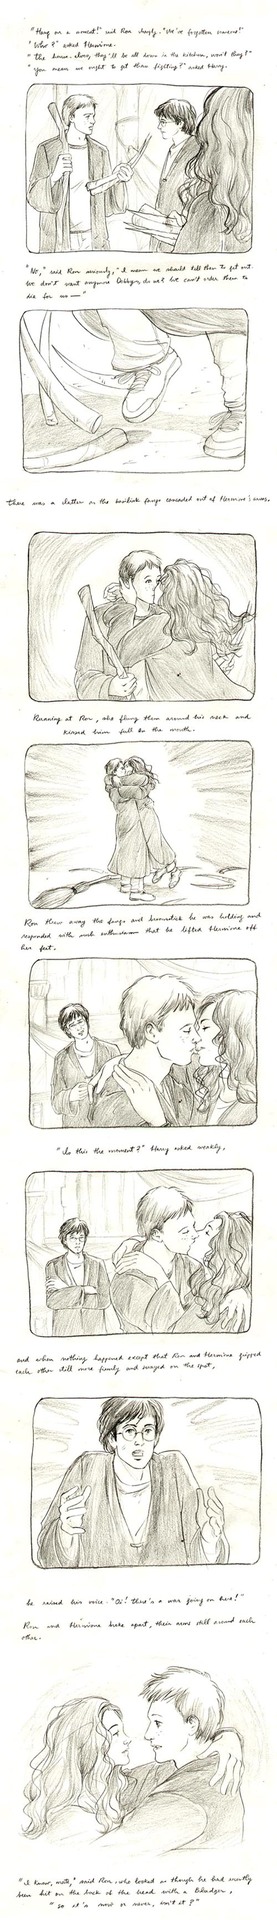 Harry potter 7 ron and hermione kiss scene.